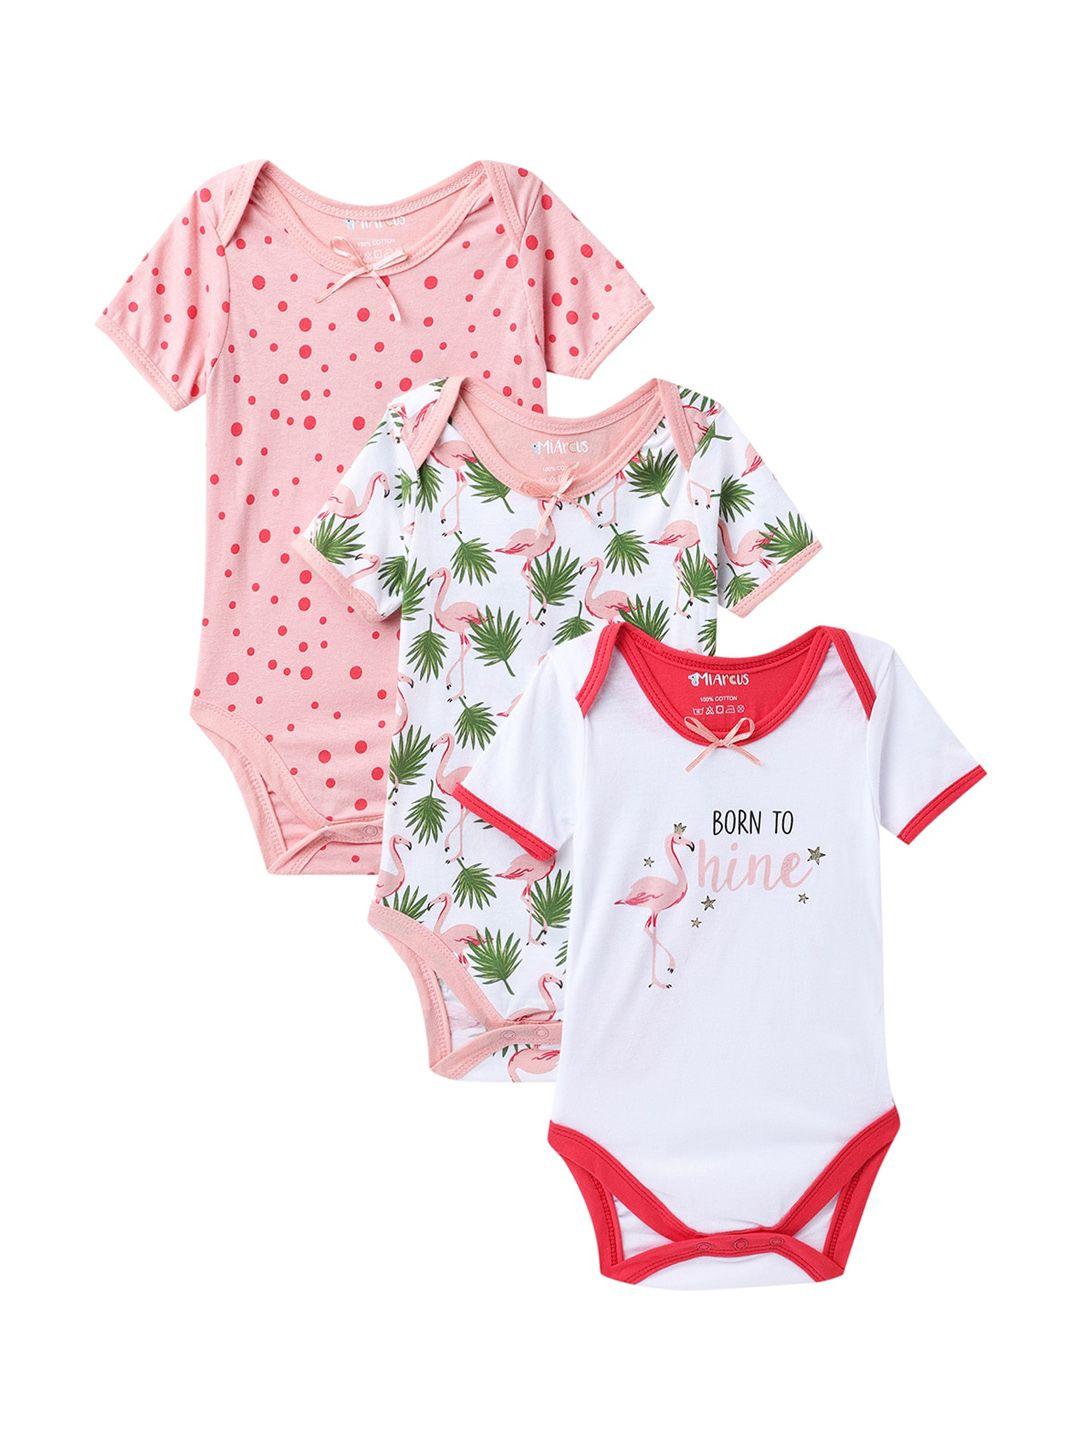 miarcus kids pack of 3 flamingo printed cotton rompers